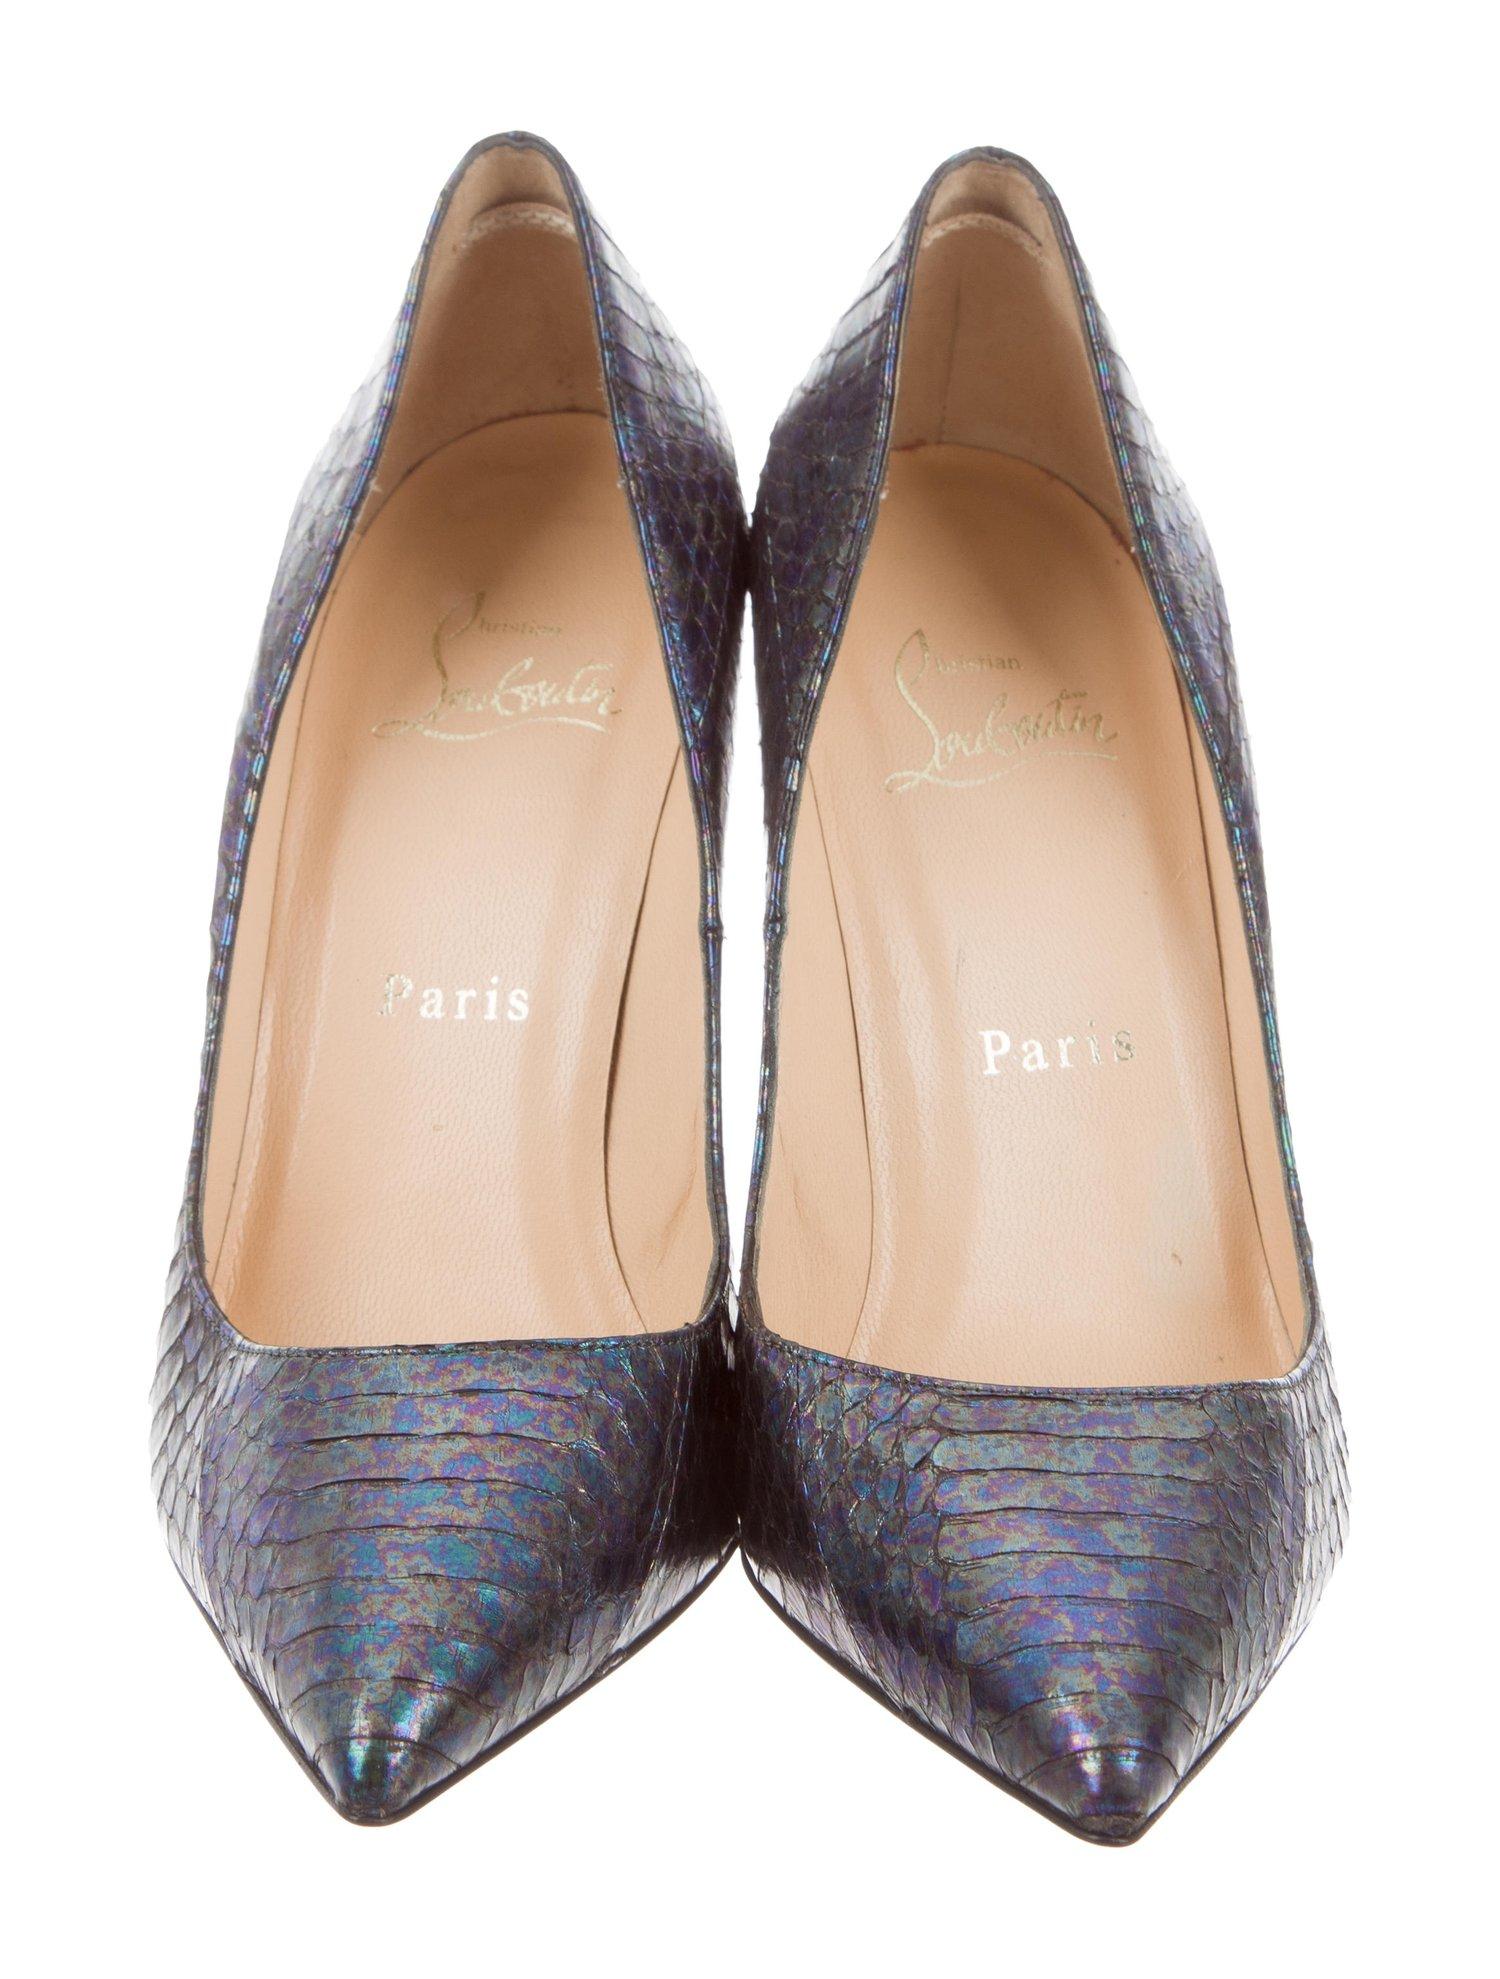 Christian Louboutin NEW MultiColor Iridescent Snake Evening Heels Pumps in Box

Size IT 36
Python Snakeskin
Slip on
Made in Italy
Heel height 4.25